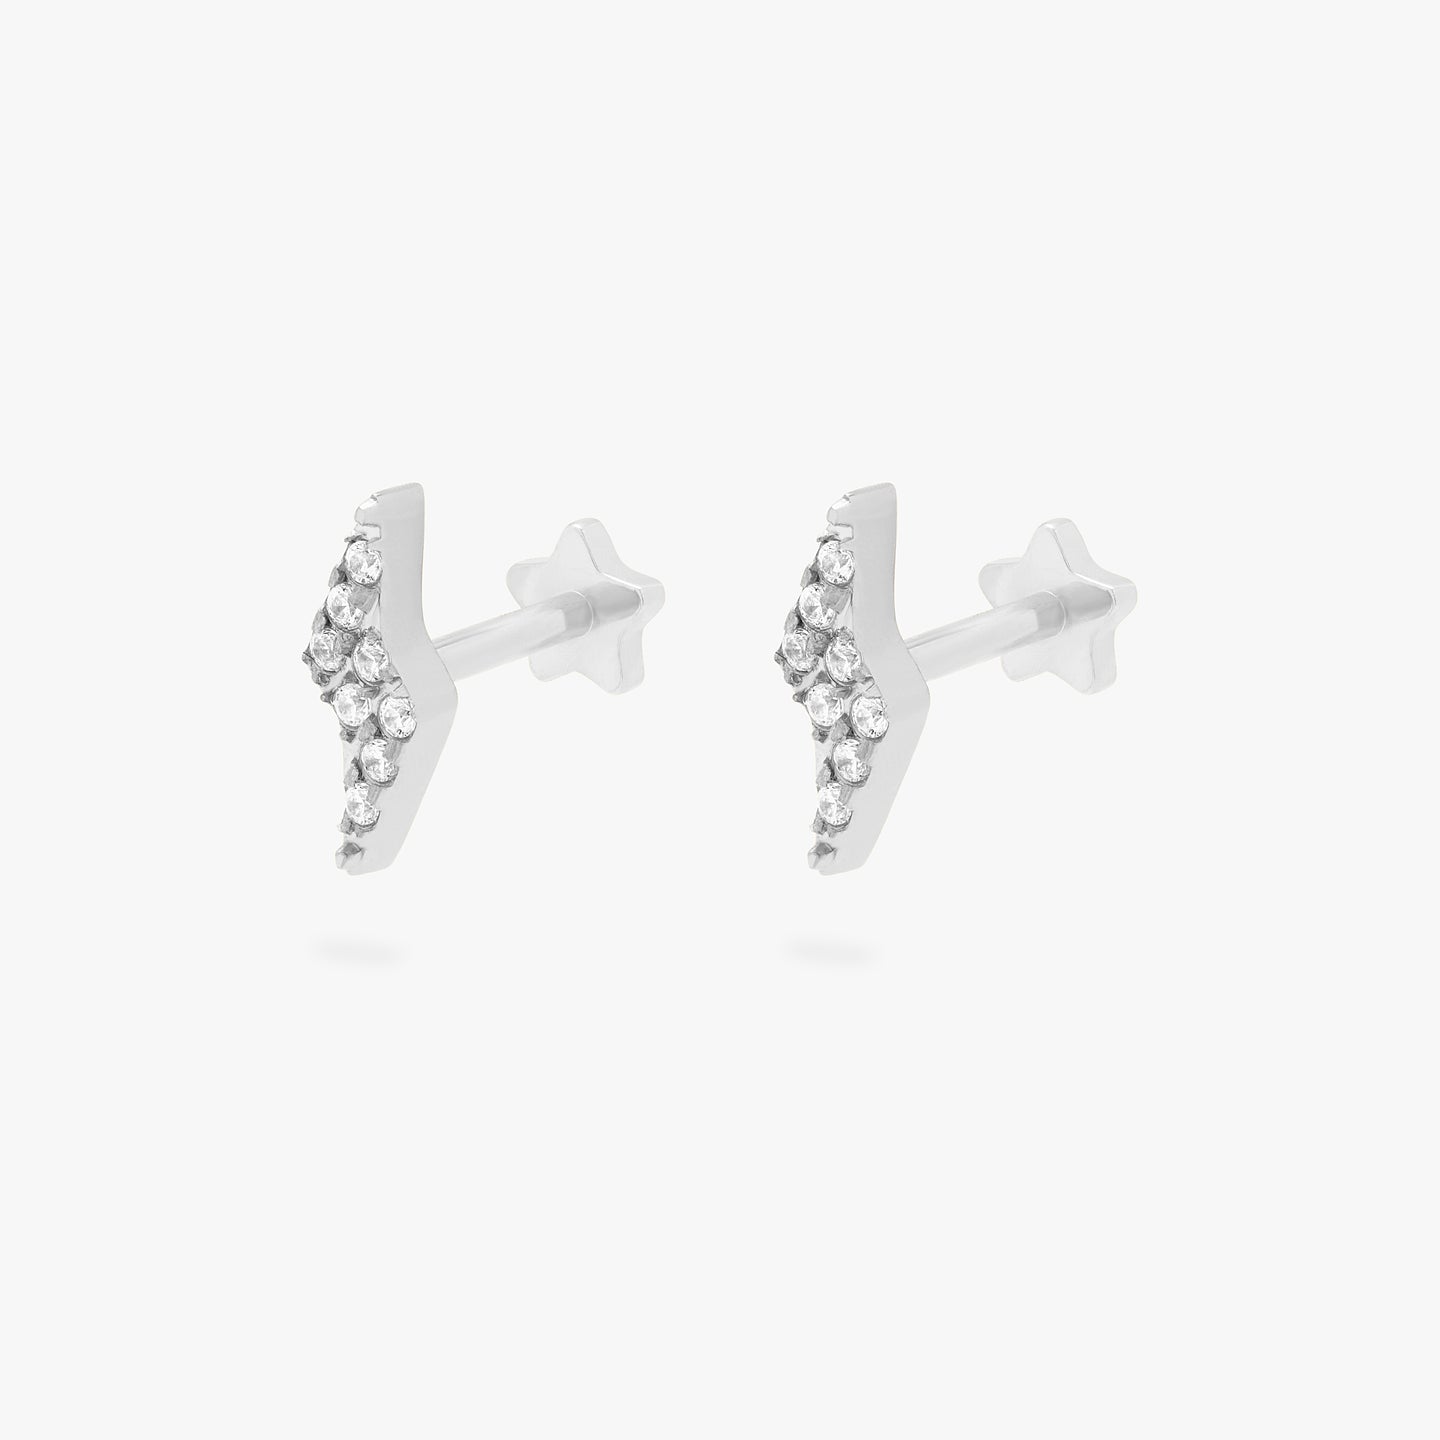 This is an image of a pair of silver/clear pave lightning-bolt shaped flatback tops with silver labrets that have star-shaped discs. [pair] color:null|silver/clear